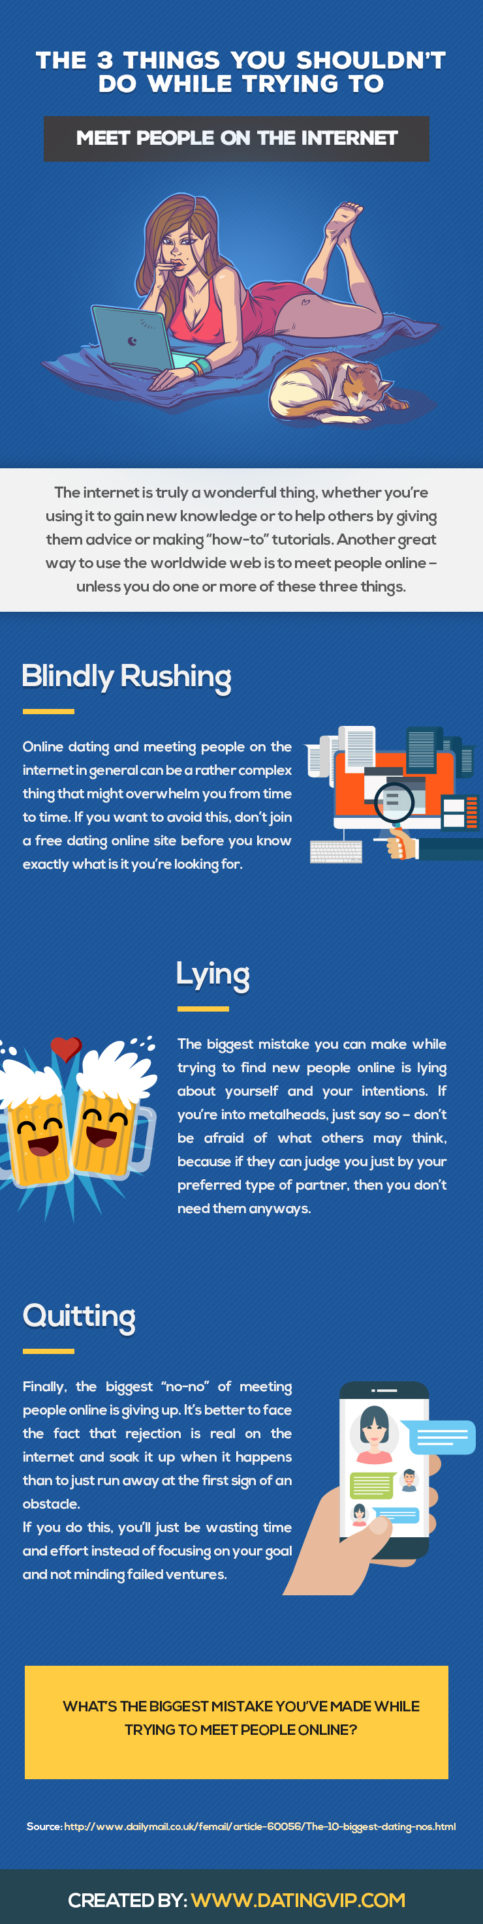 The 3 Things You Shouldn’t Do While Trying to Meet People on the Internet